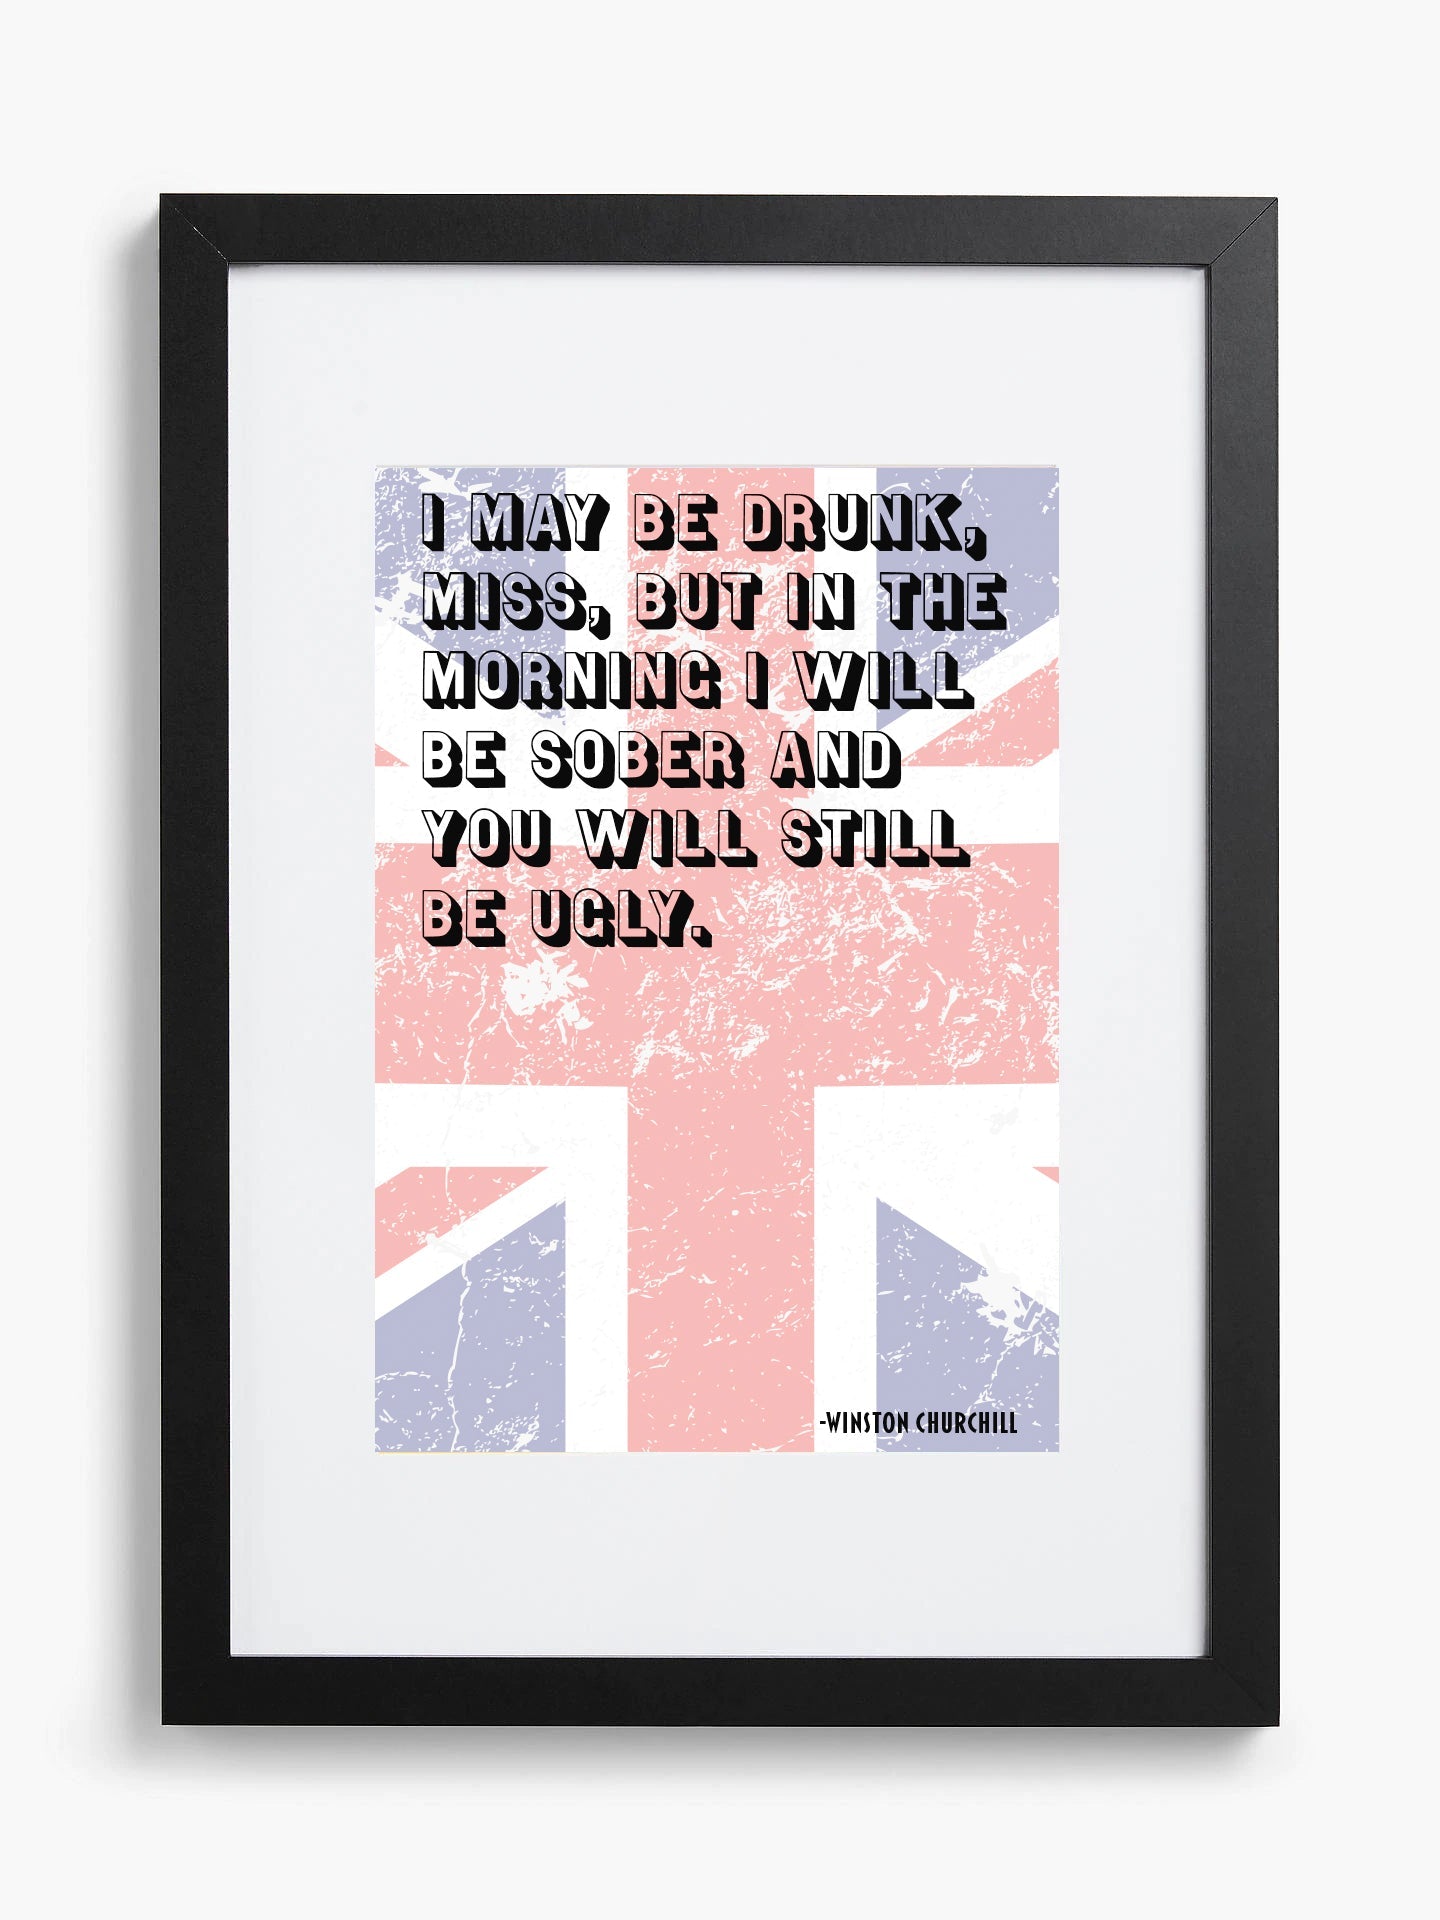 I May Be Drunk - Framed Quotation